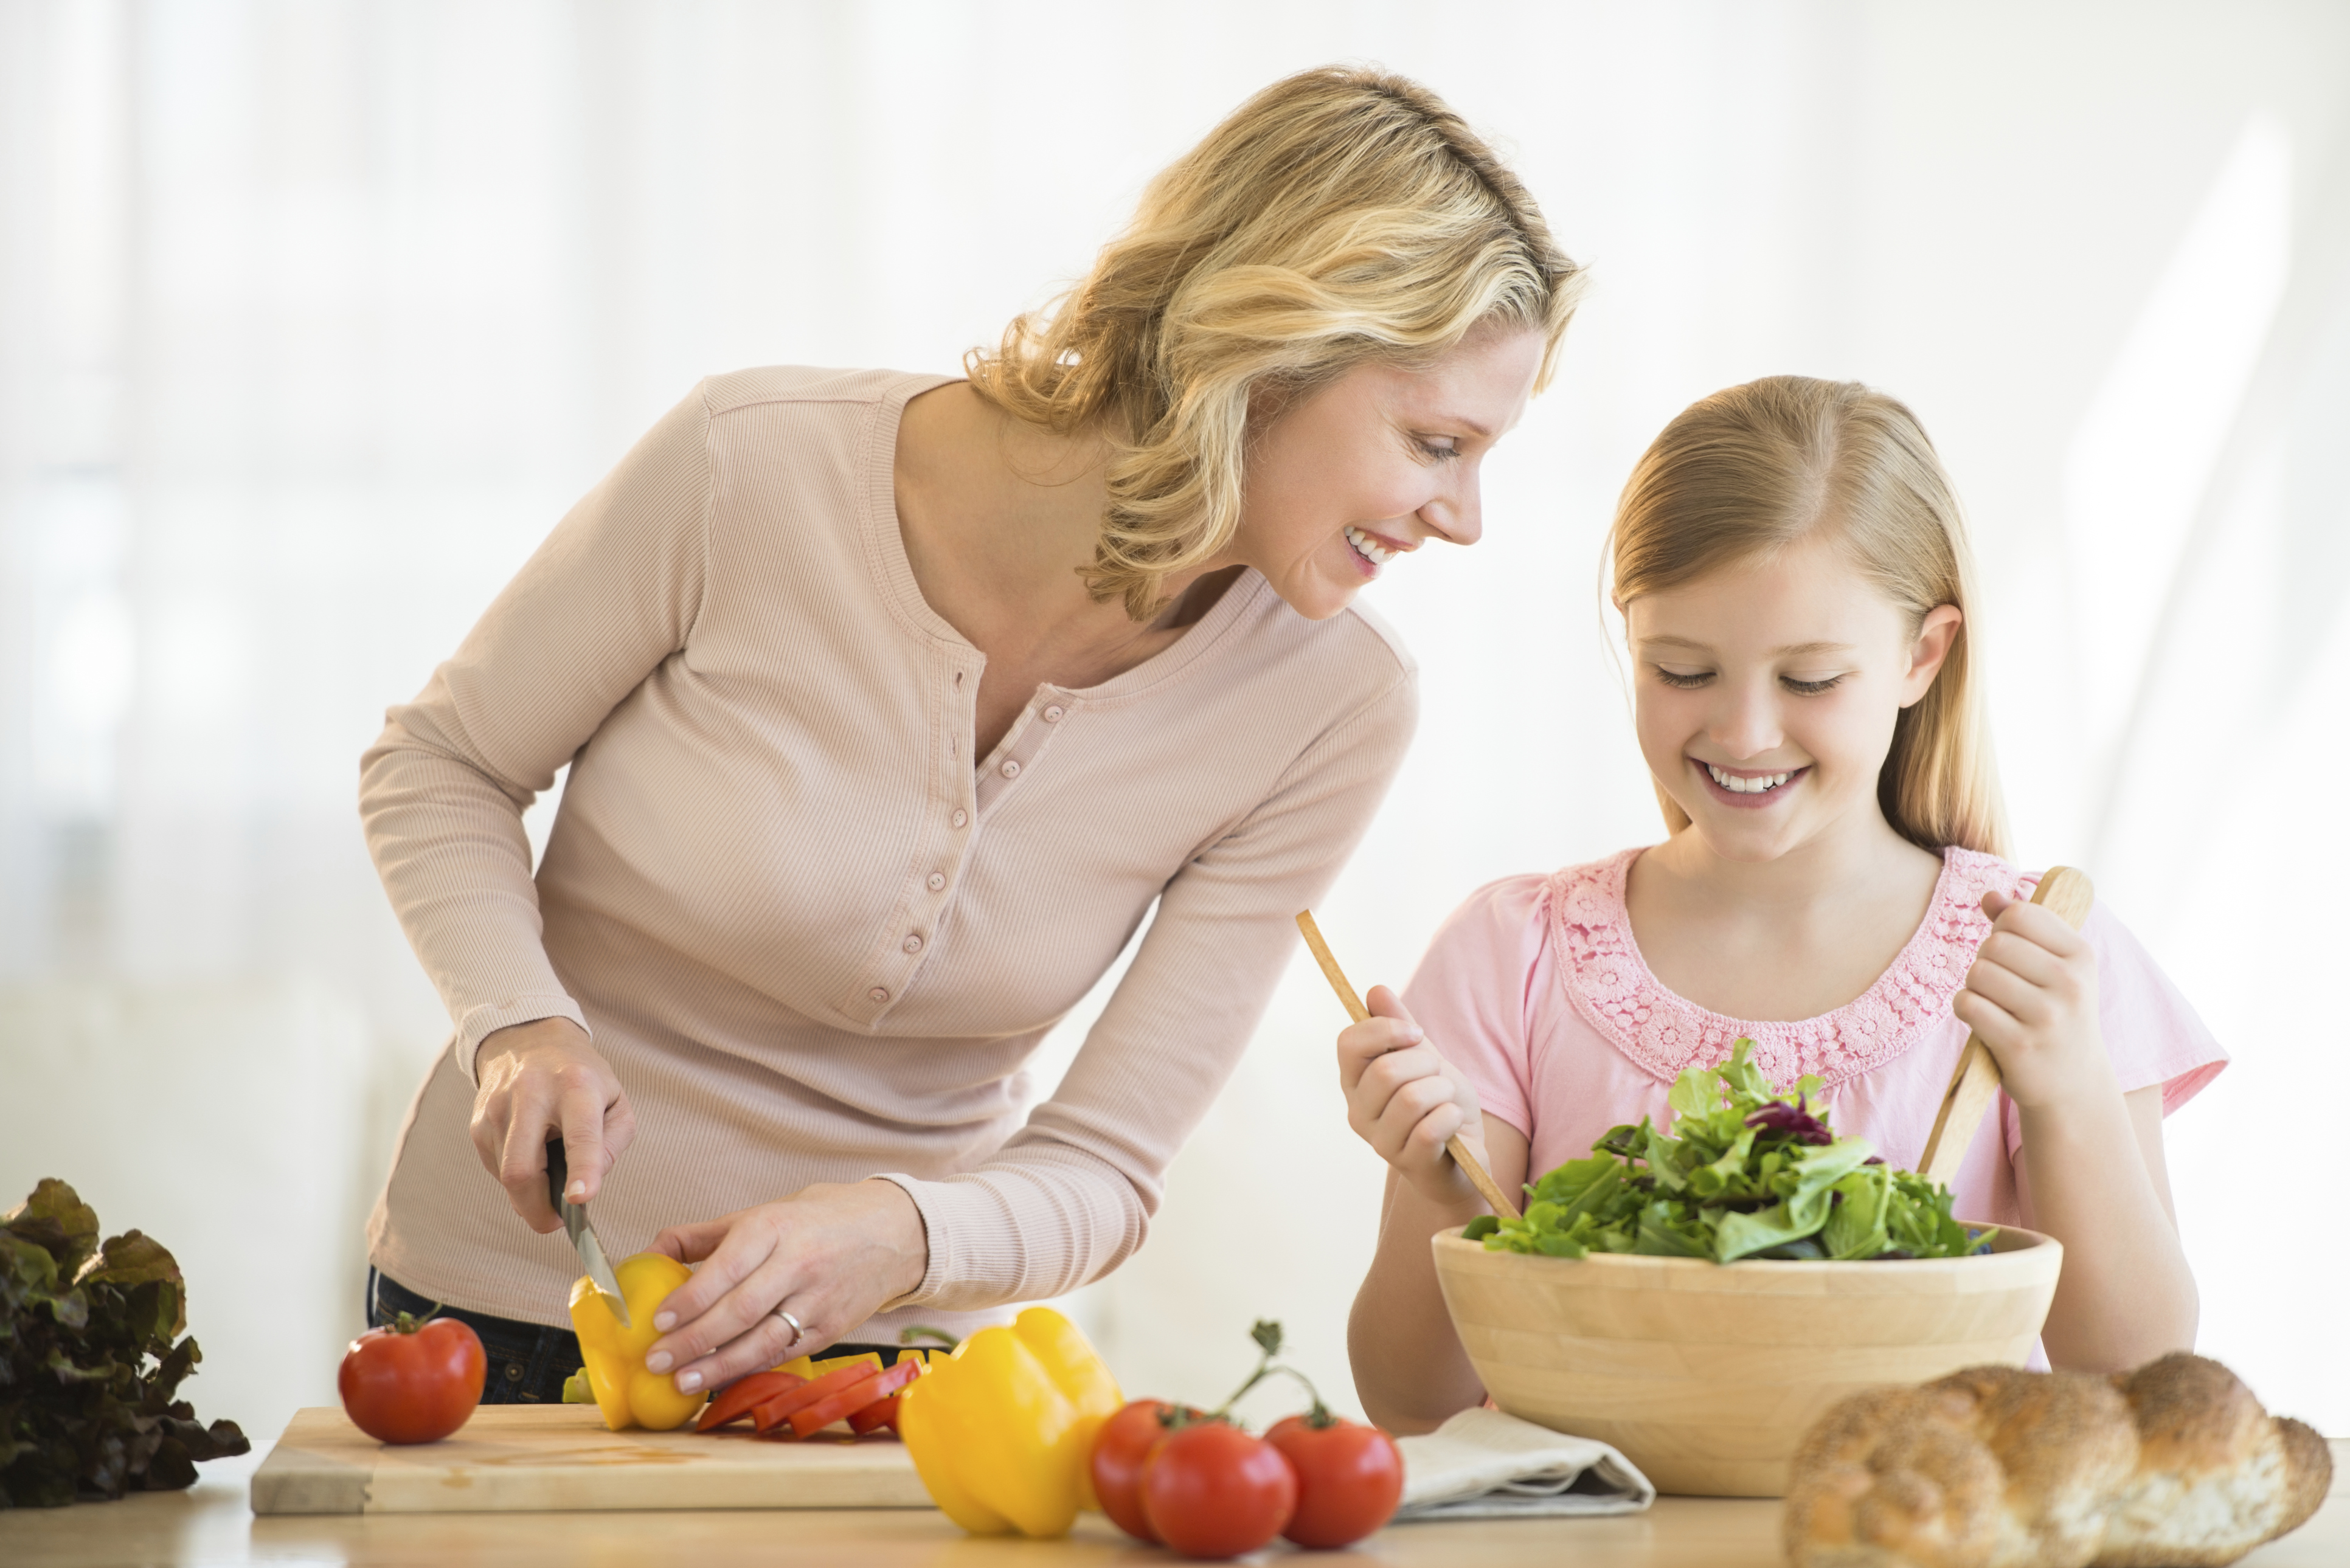 Girl Assisting Mother In Preparing Food At Counter